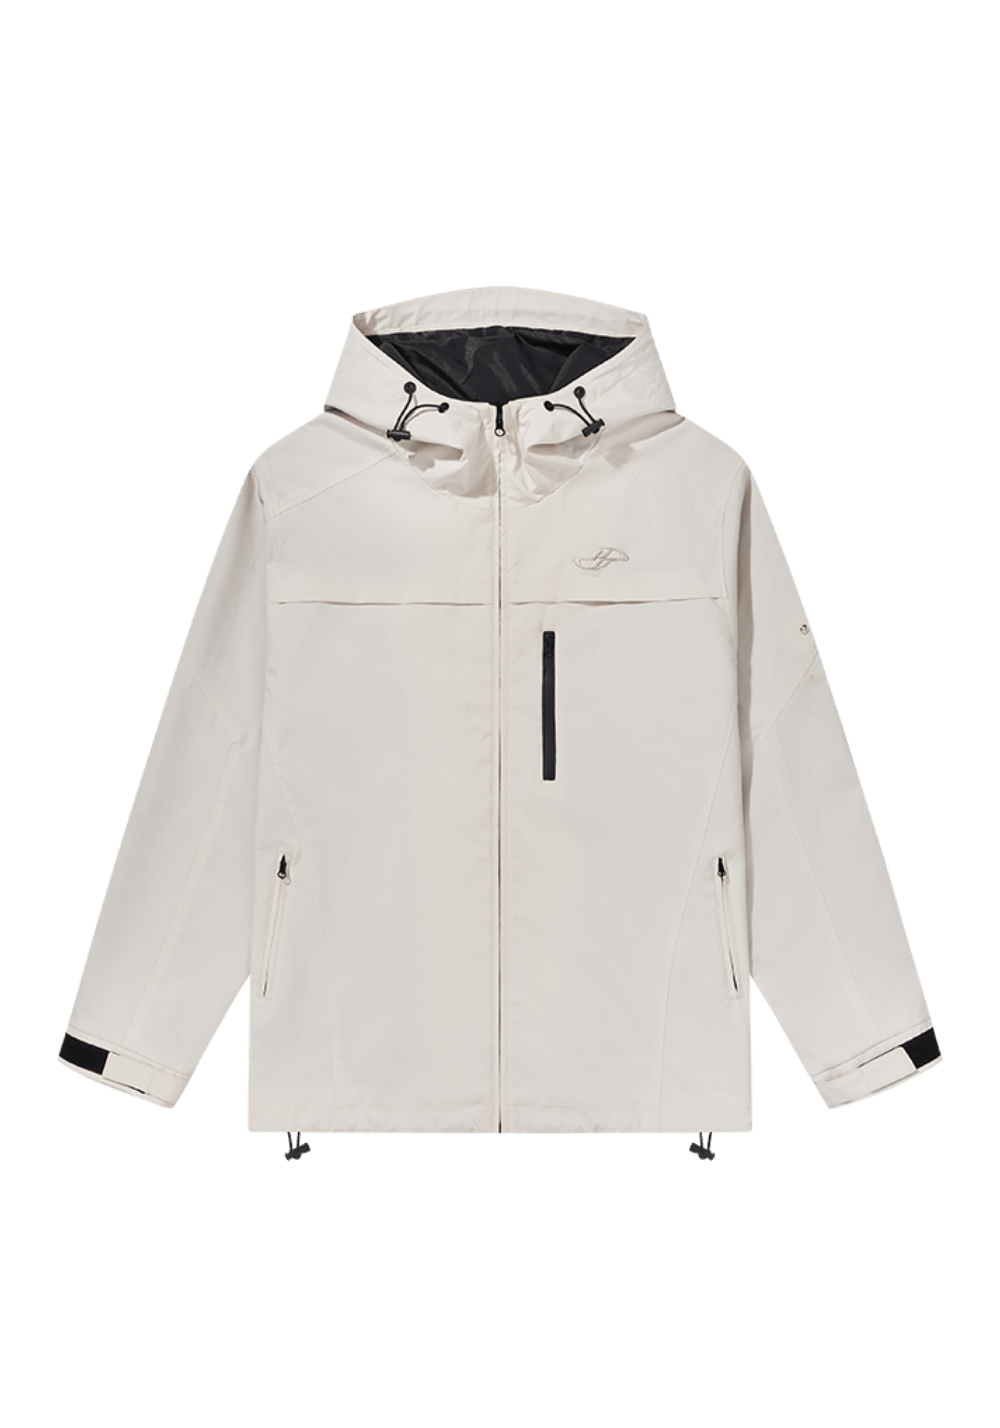 Casual Sports Outdoor Jacket - PSYLOS 1, Casual Sports Outdoor Jacket, Jacket, HARSH AND CRUEL, PSYLOS 1